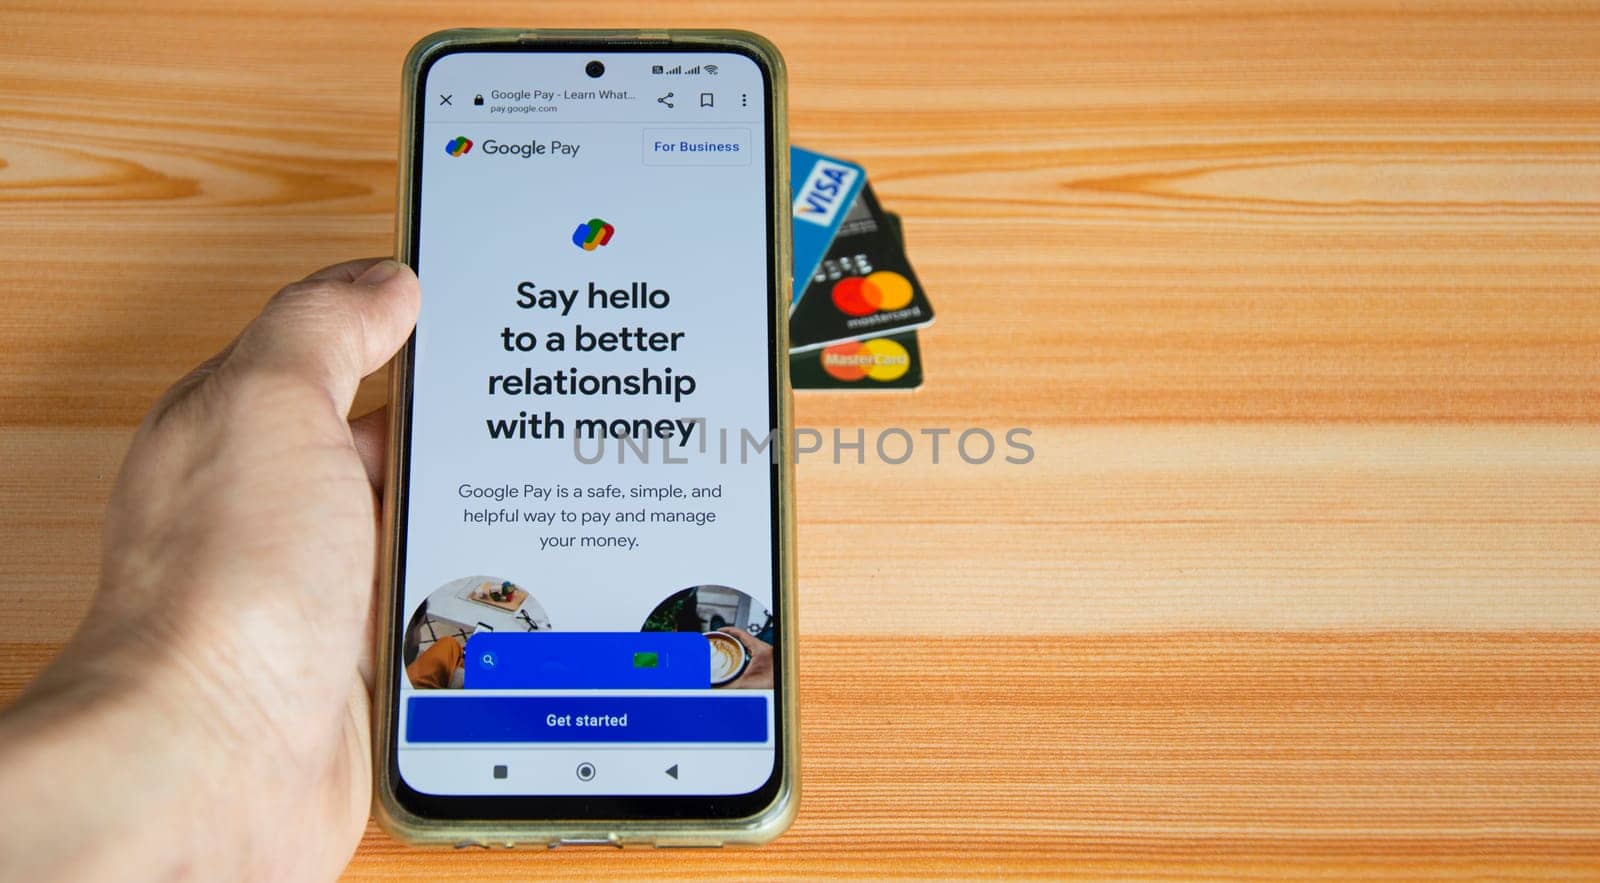 26-11-2022 Chonburi, Thailand, Google Gpay, Wallet is starting to use and is an application that combines financial matters Purchasing and shopping online by boonruen